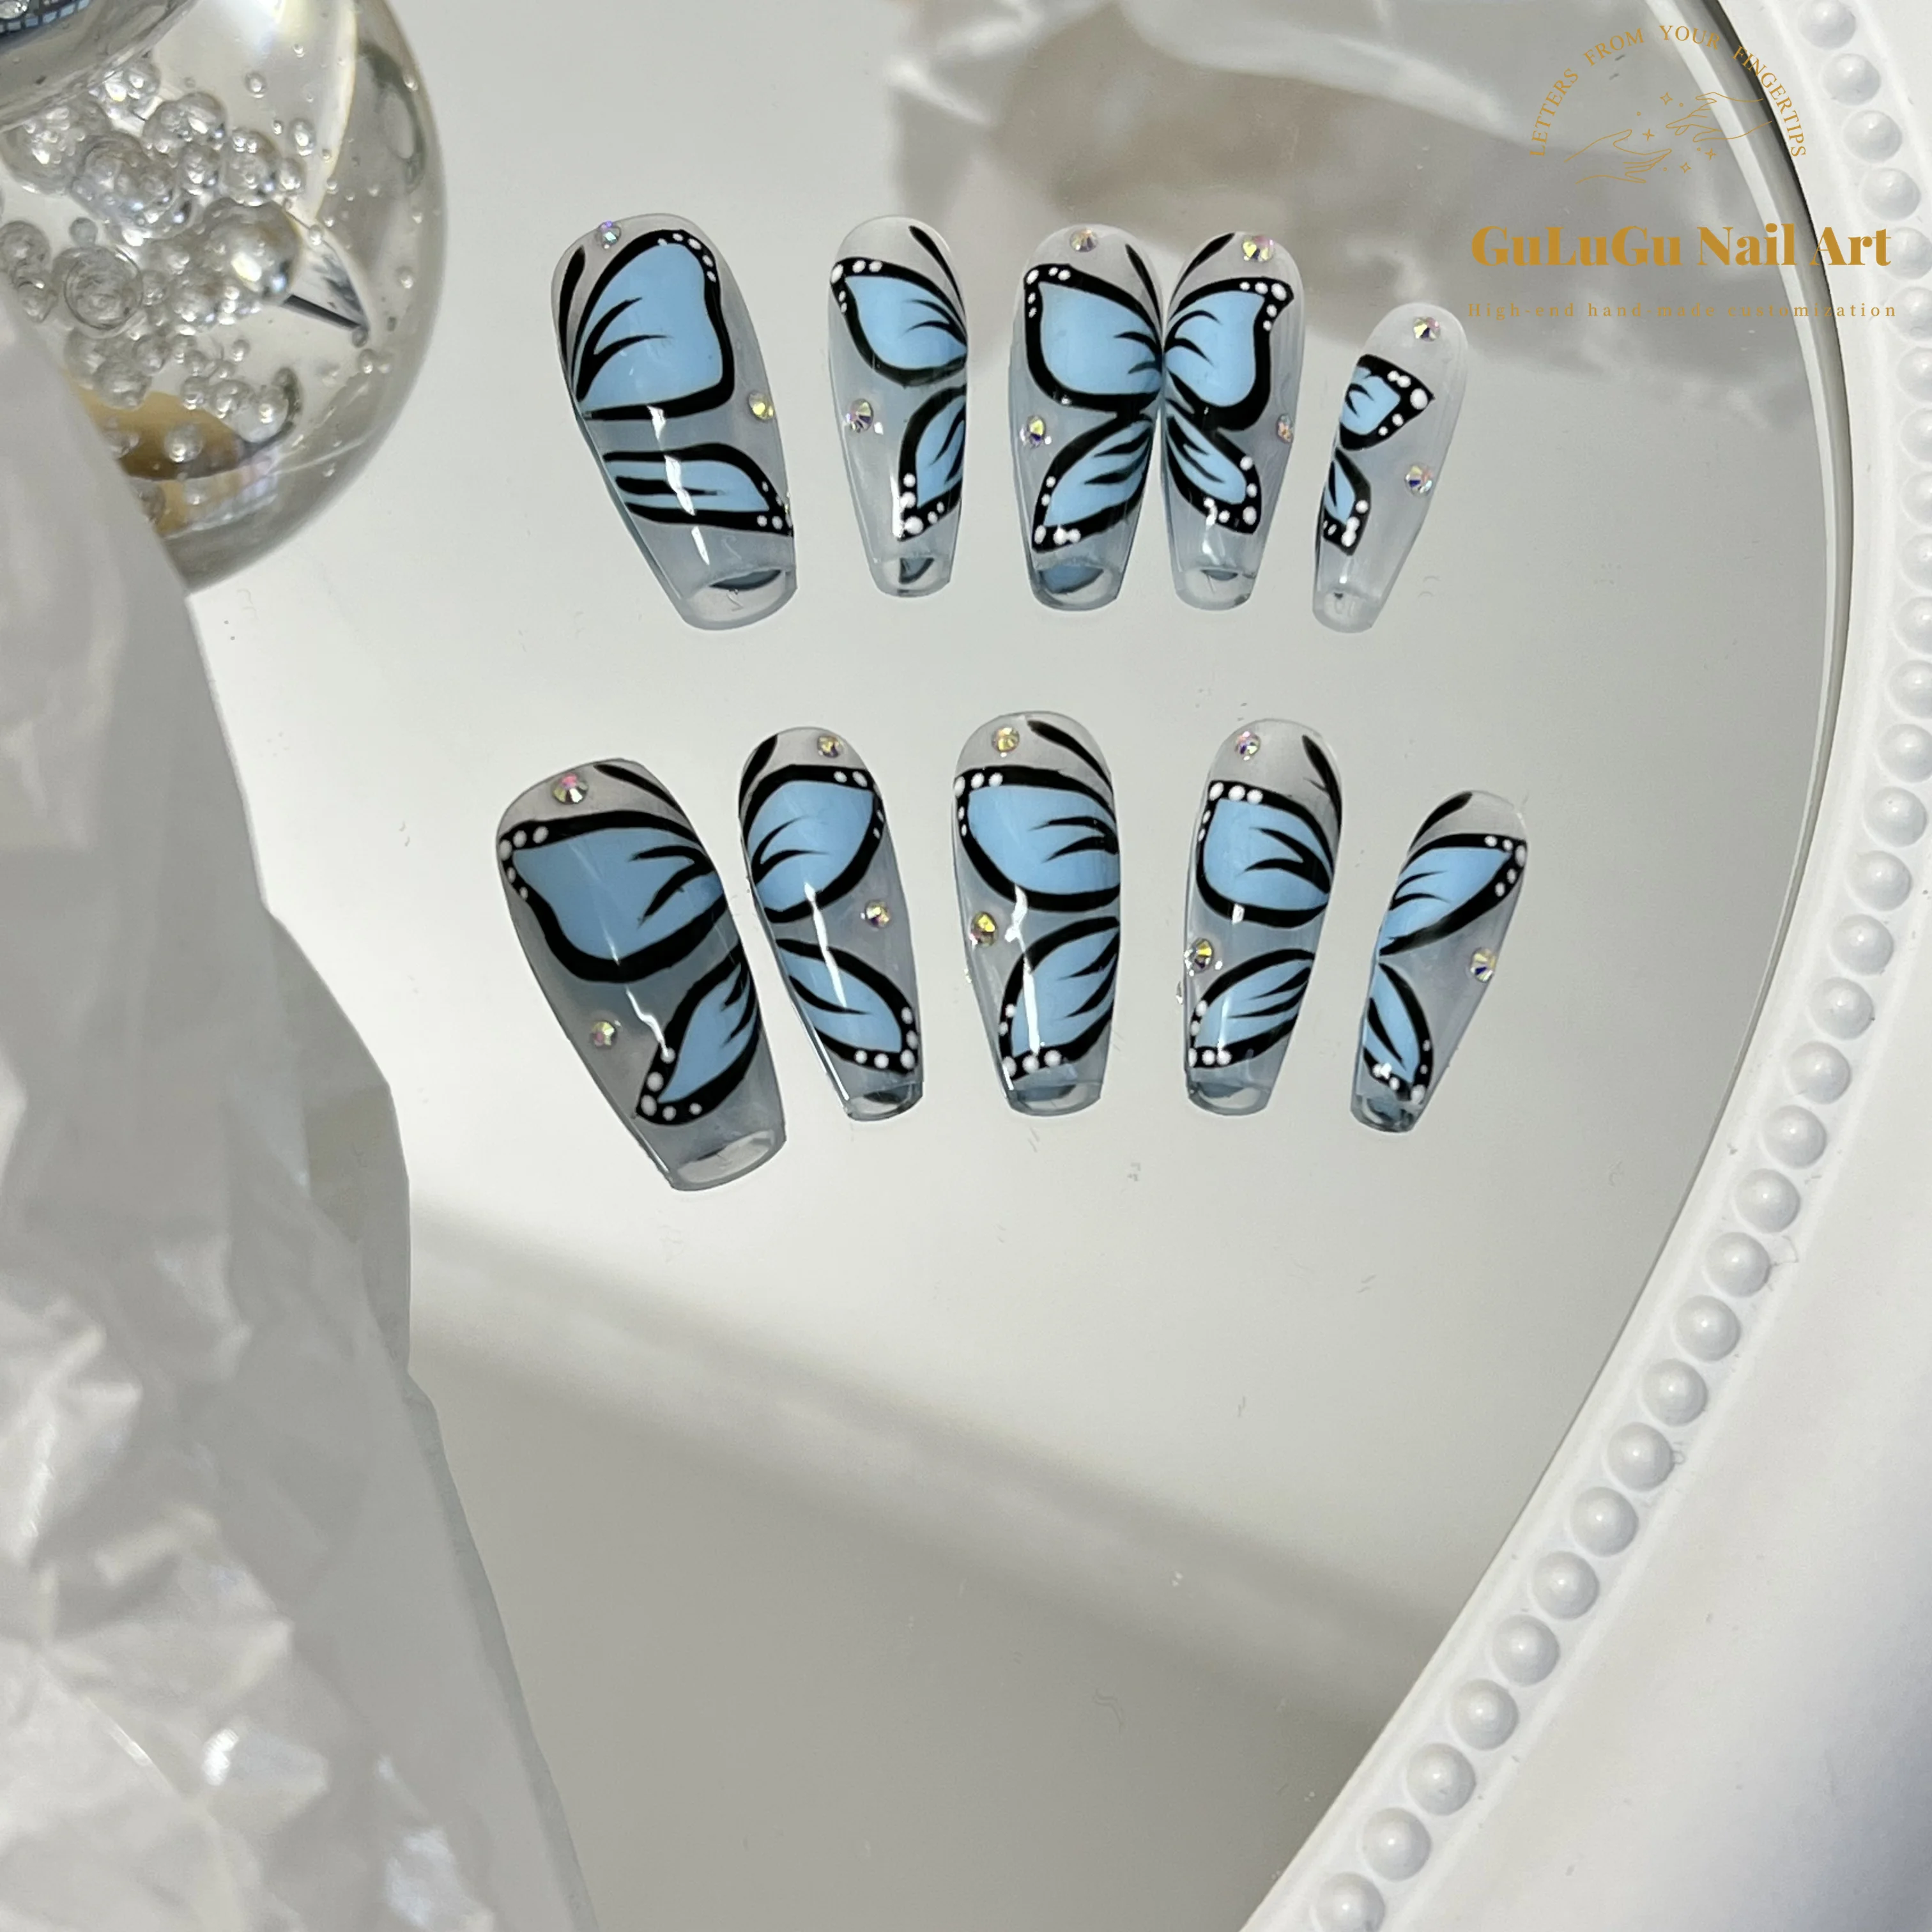 12 Pieces/Box New Fake Nails Reusable Hand-Painted Design Blue Butterfly Premium Custom Women'S Nail Art Free Shipping